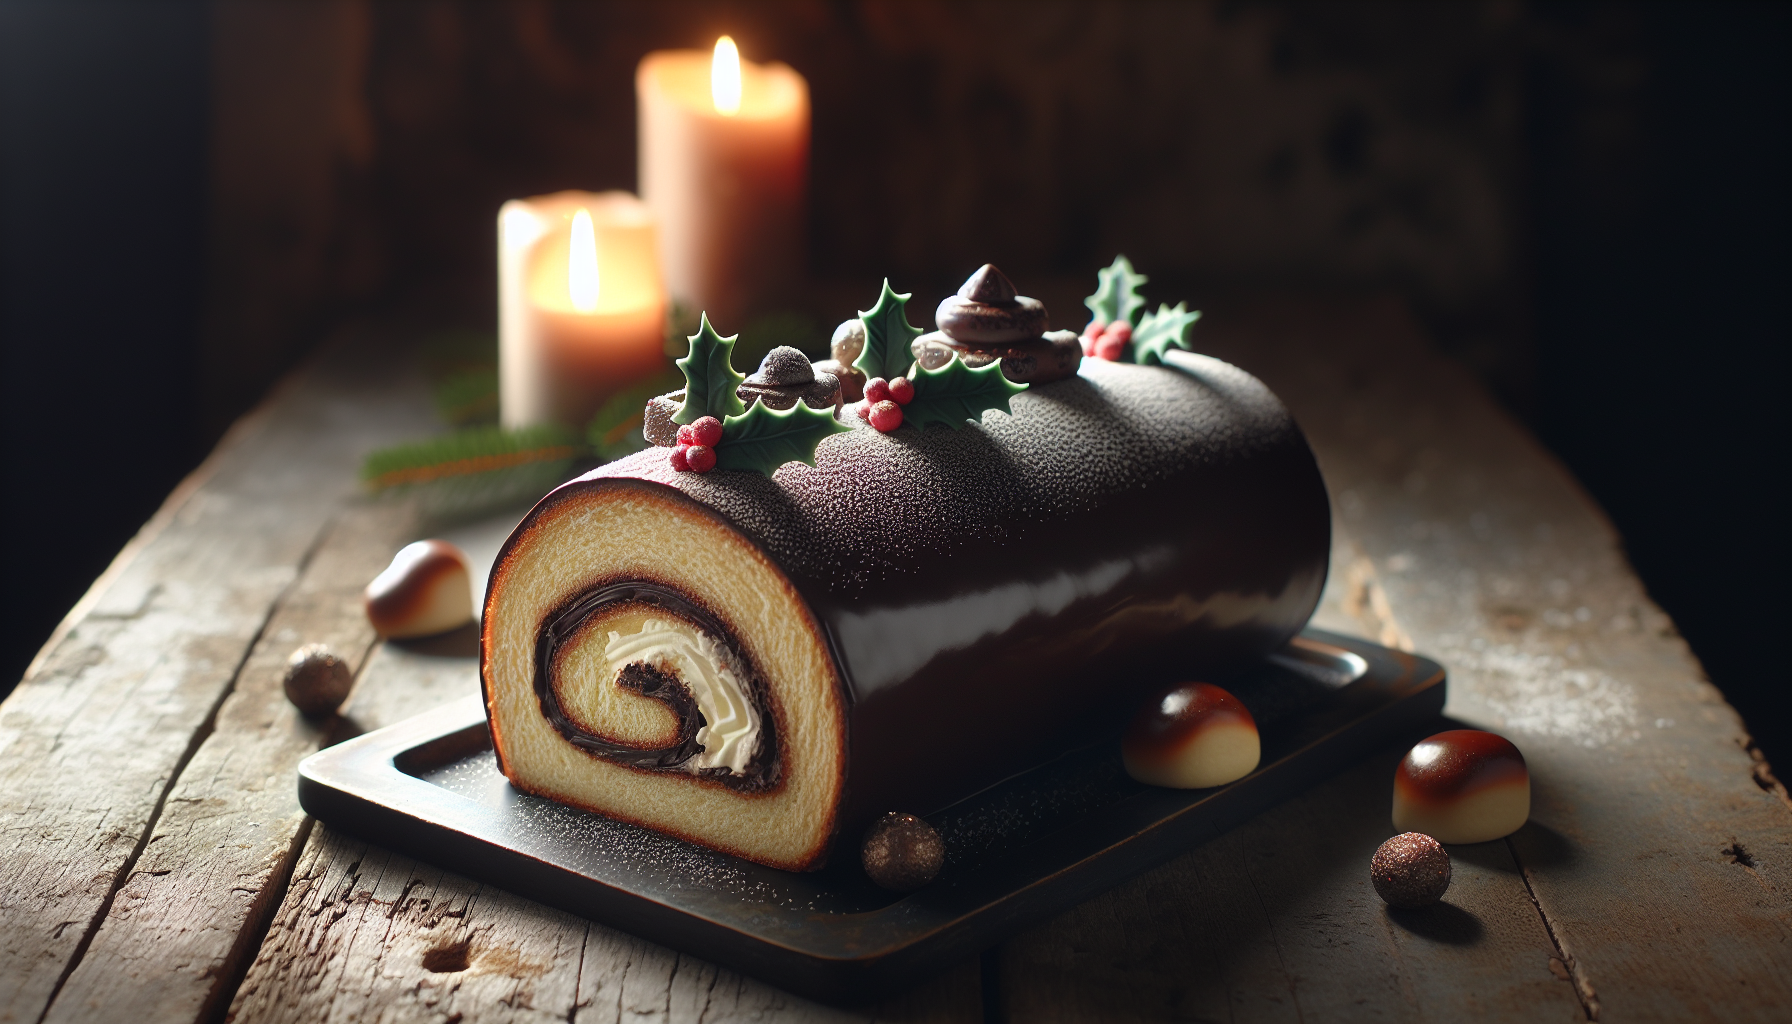 Bûche de Noël, a rolled sponge cake filled with cream and covered in chocolate ganache, a classic French Yule Log Cake